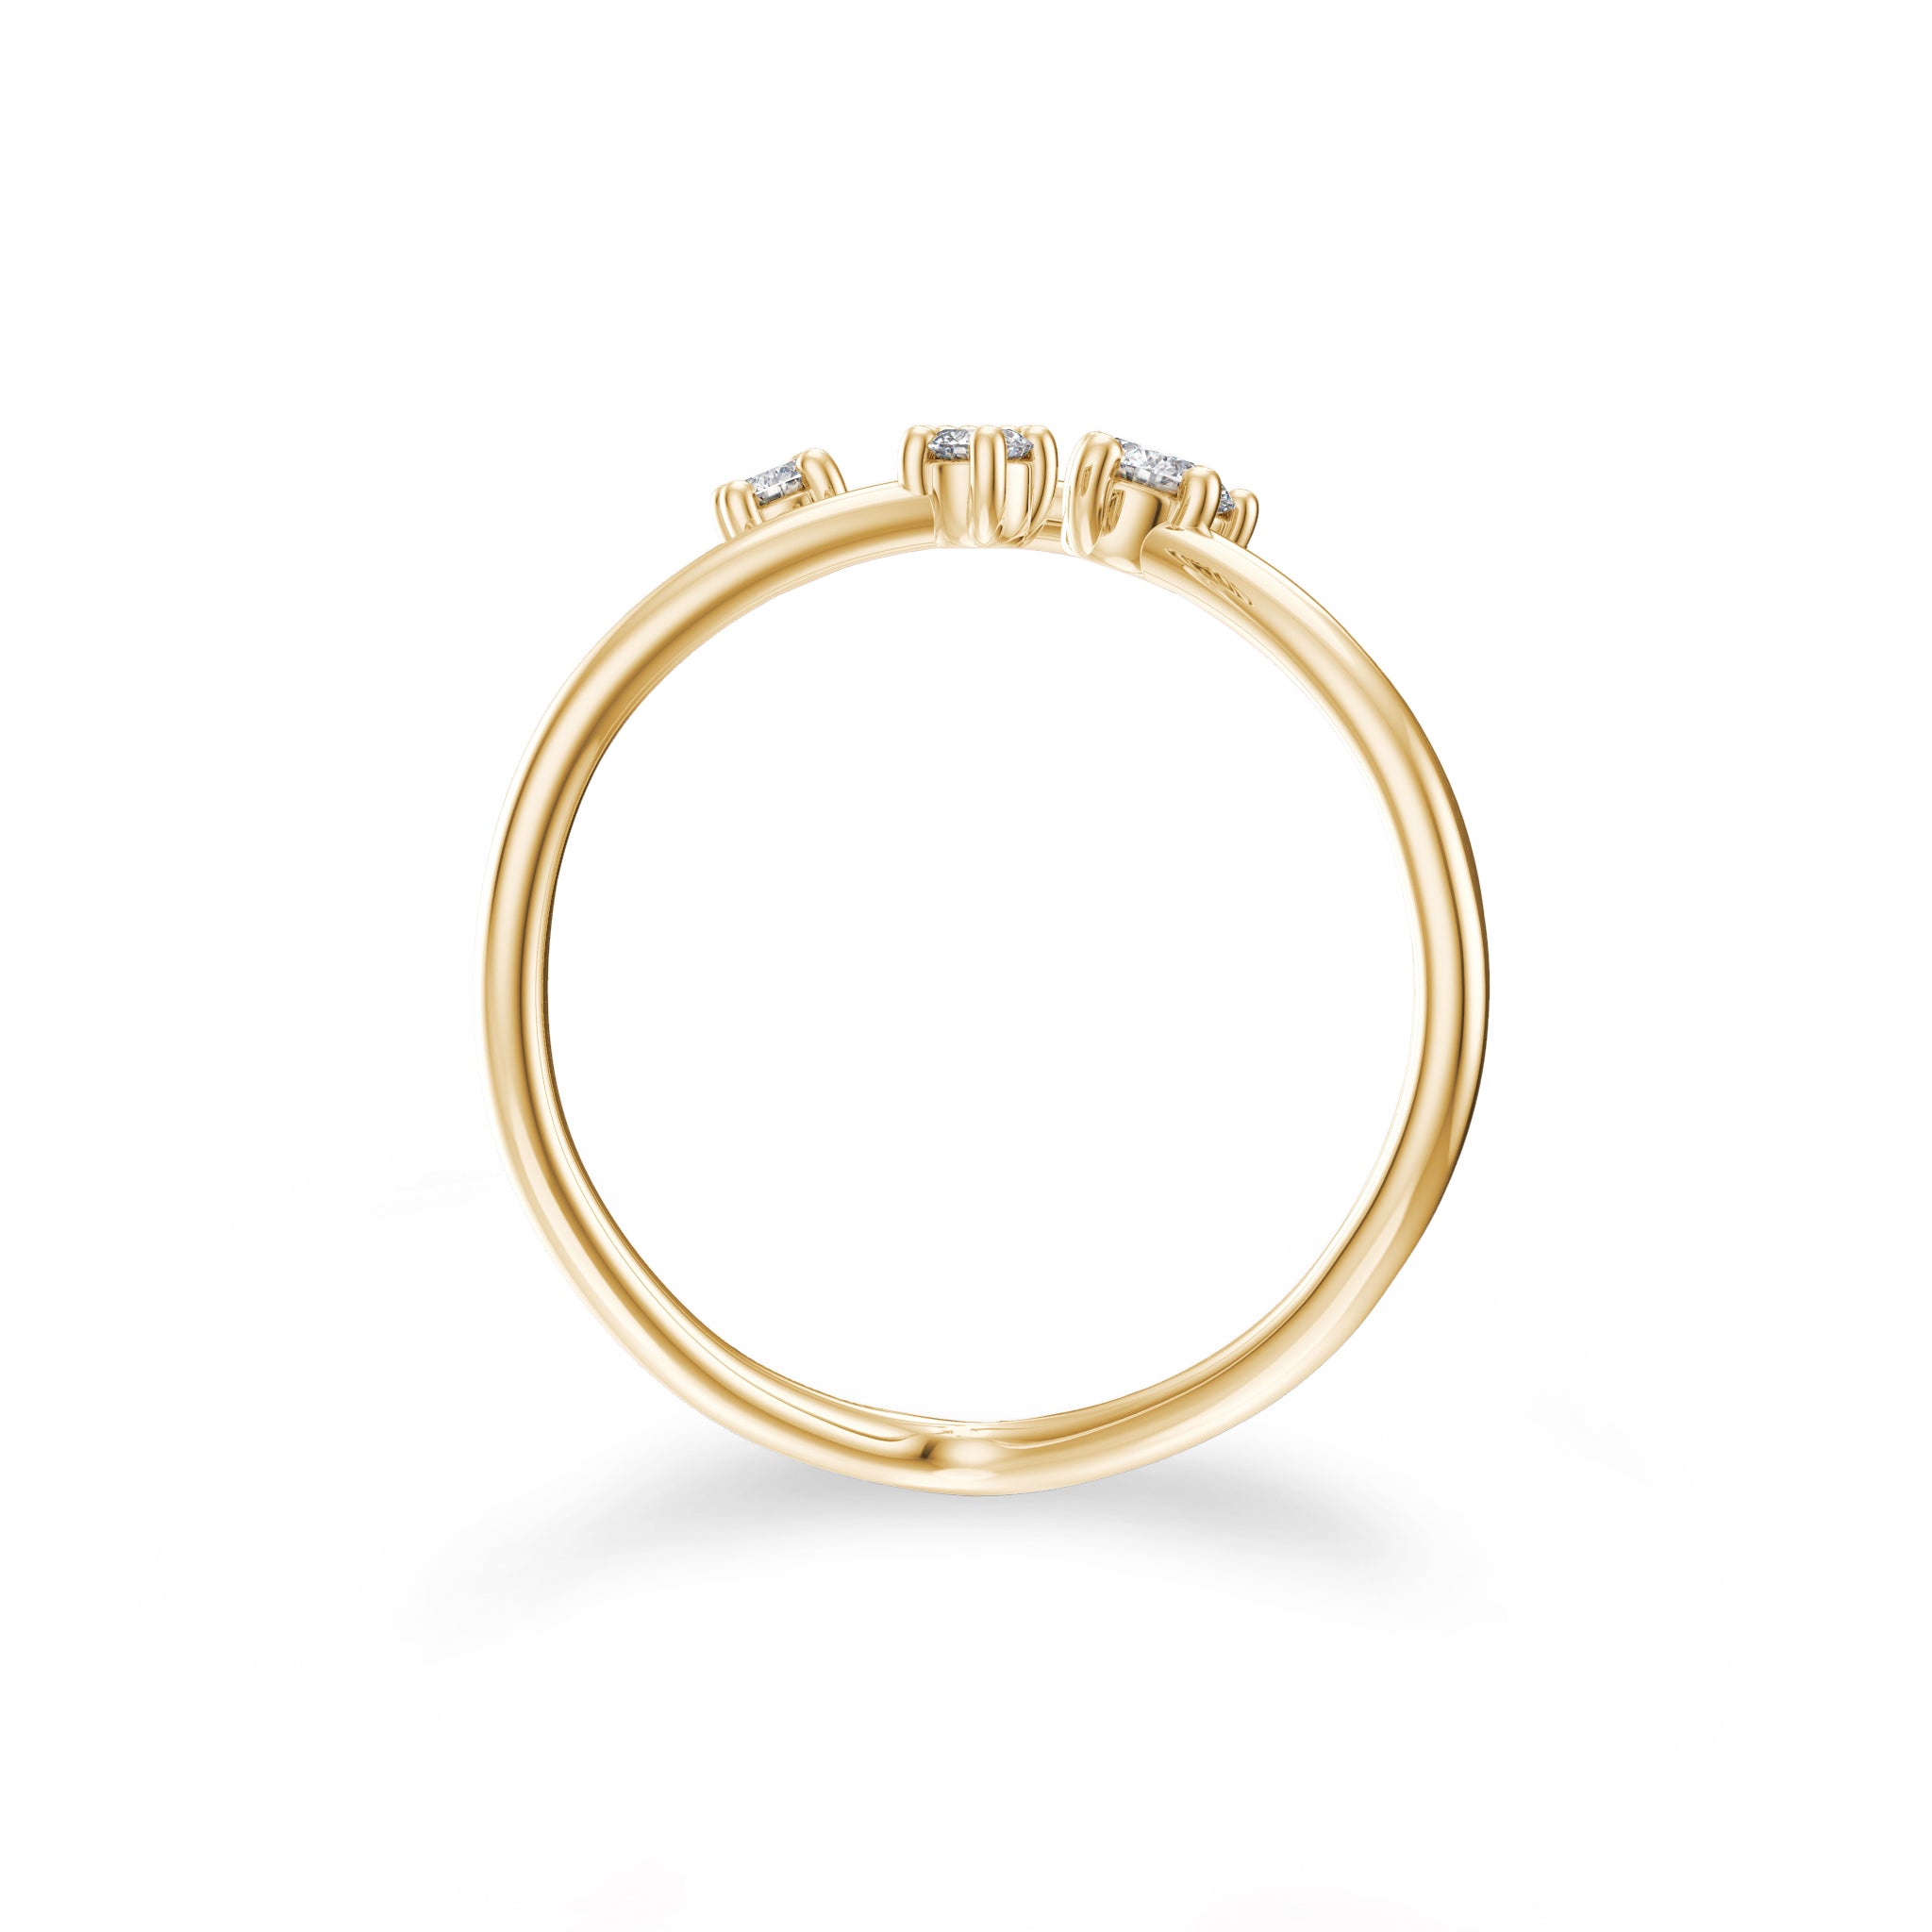 Shimansky - Southern Cross Small Diamond Ring Crafted in 14K Yellow Gold